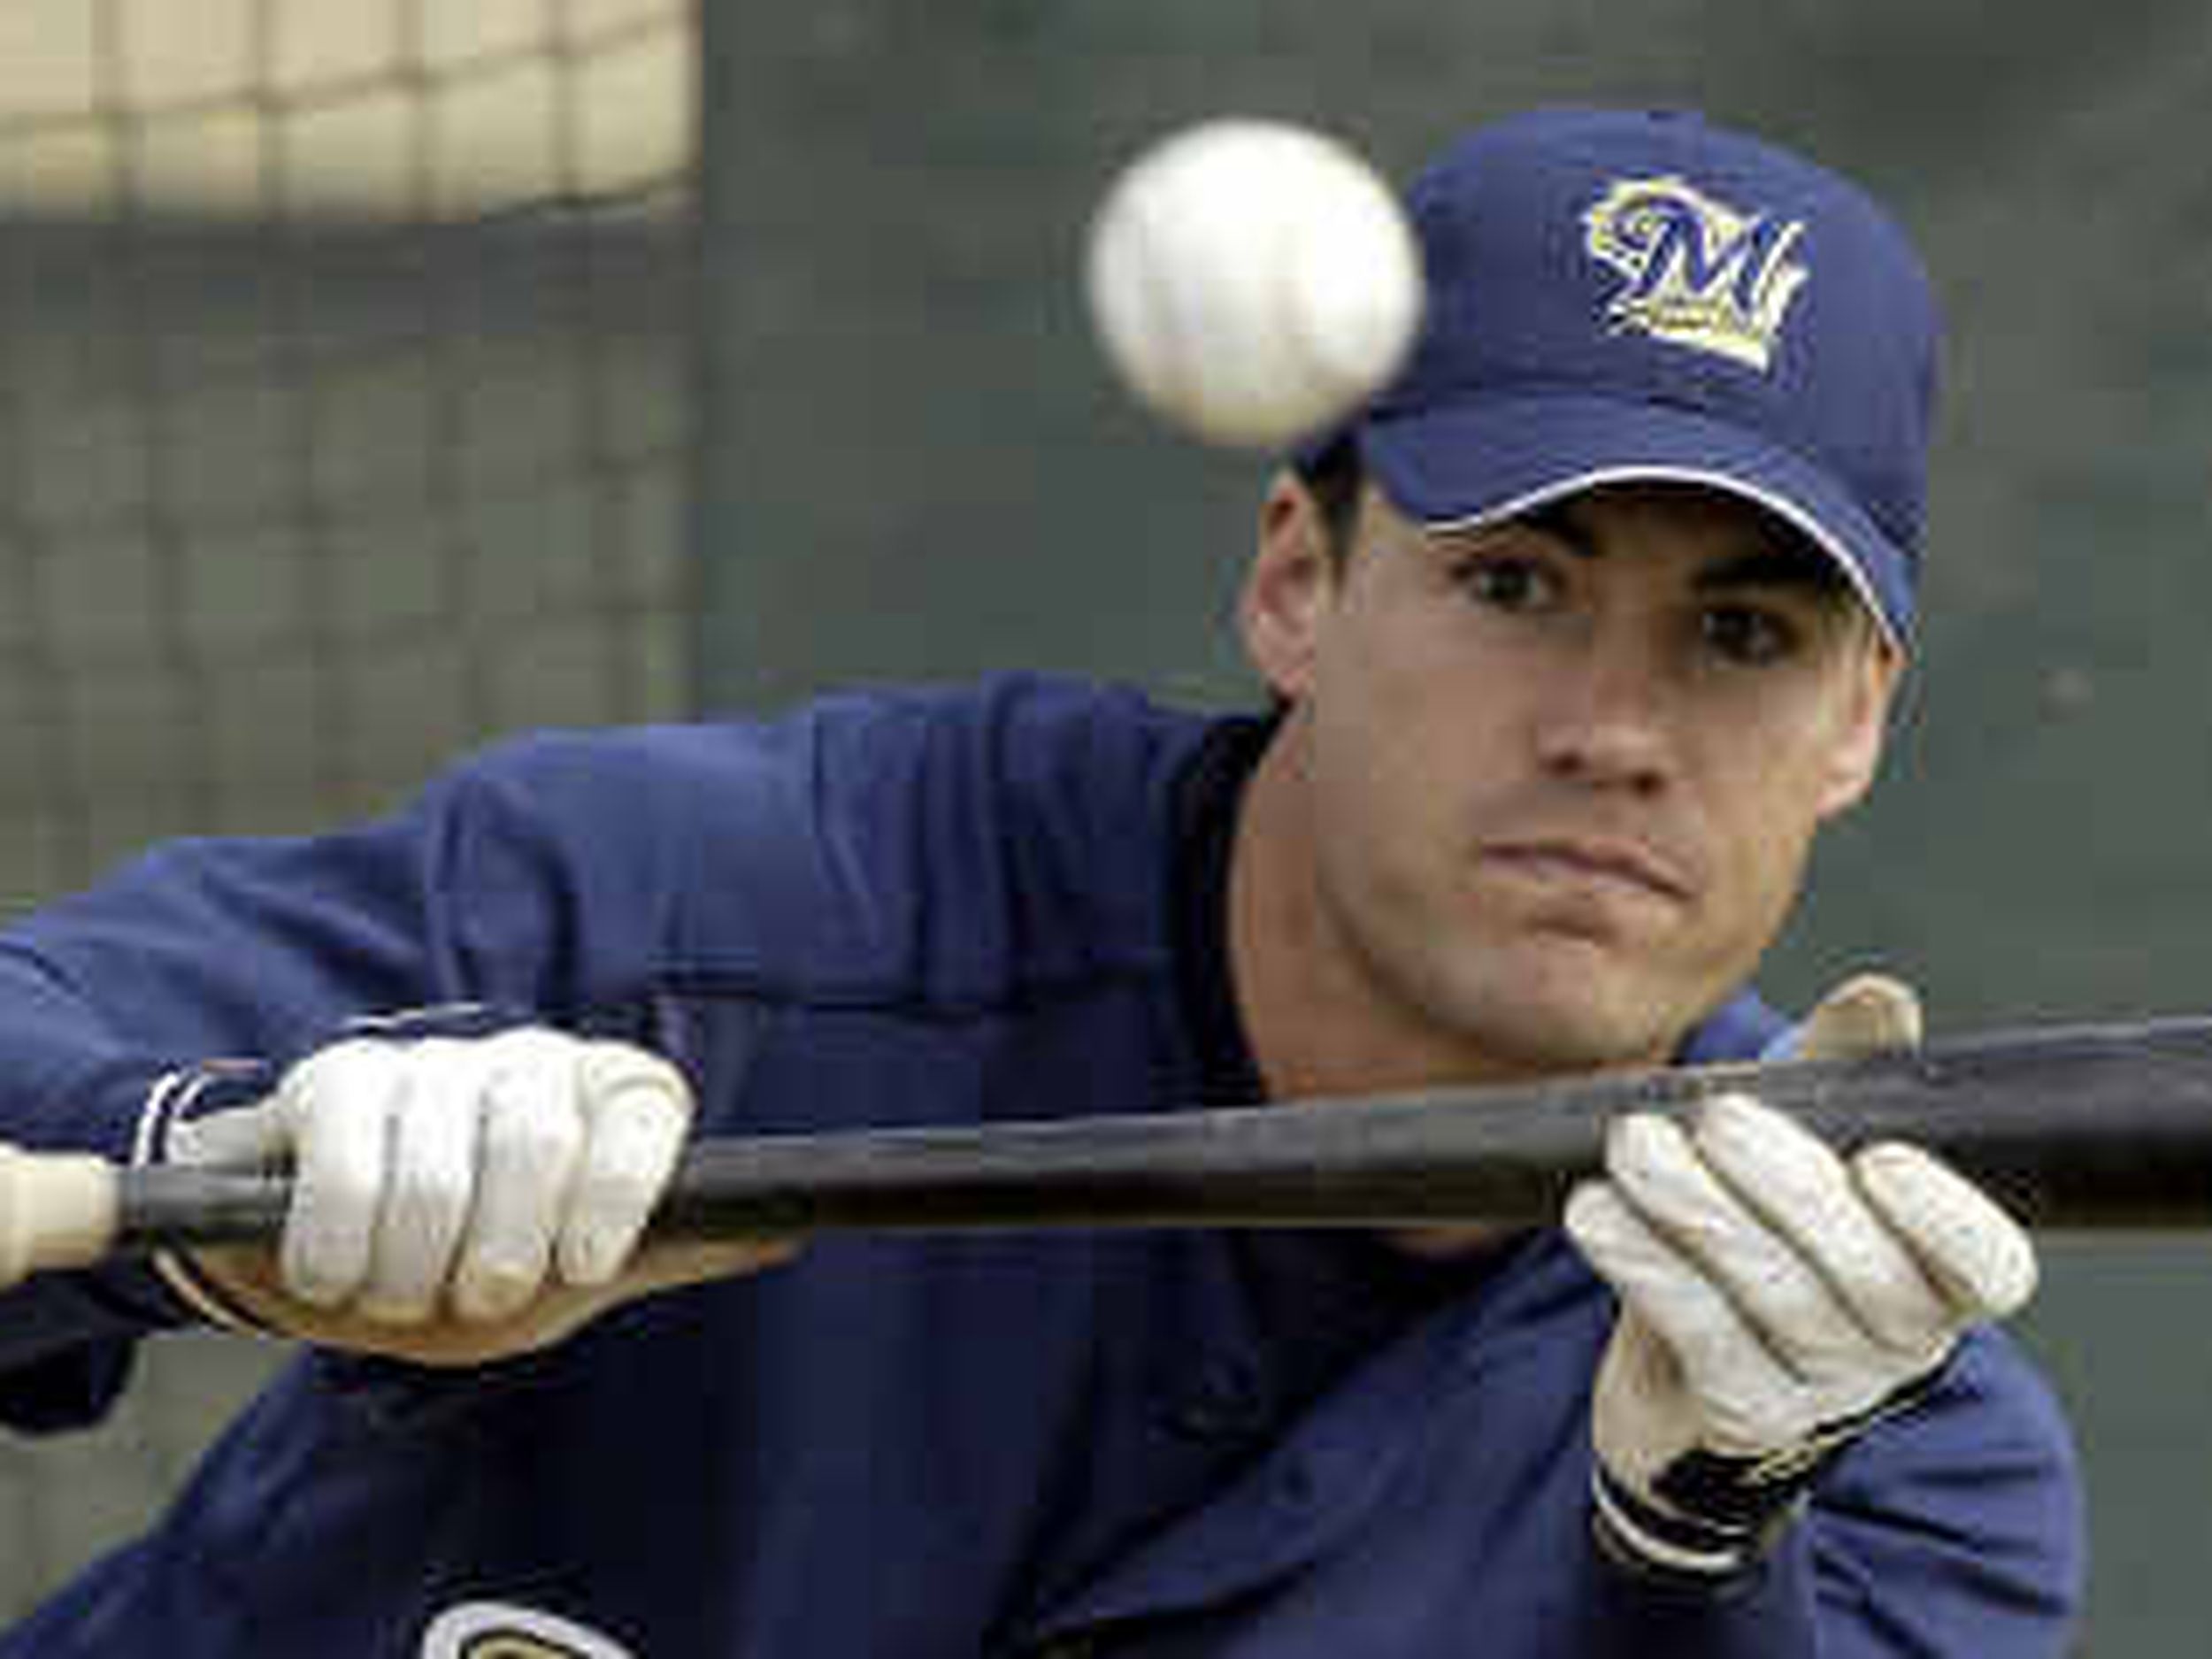 Podsednik looking to make it back to the bigs